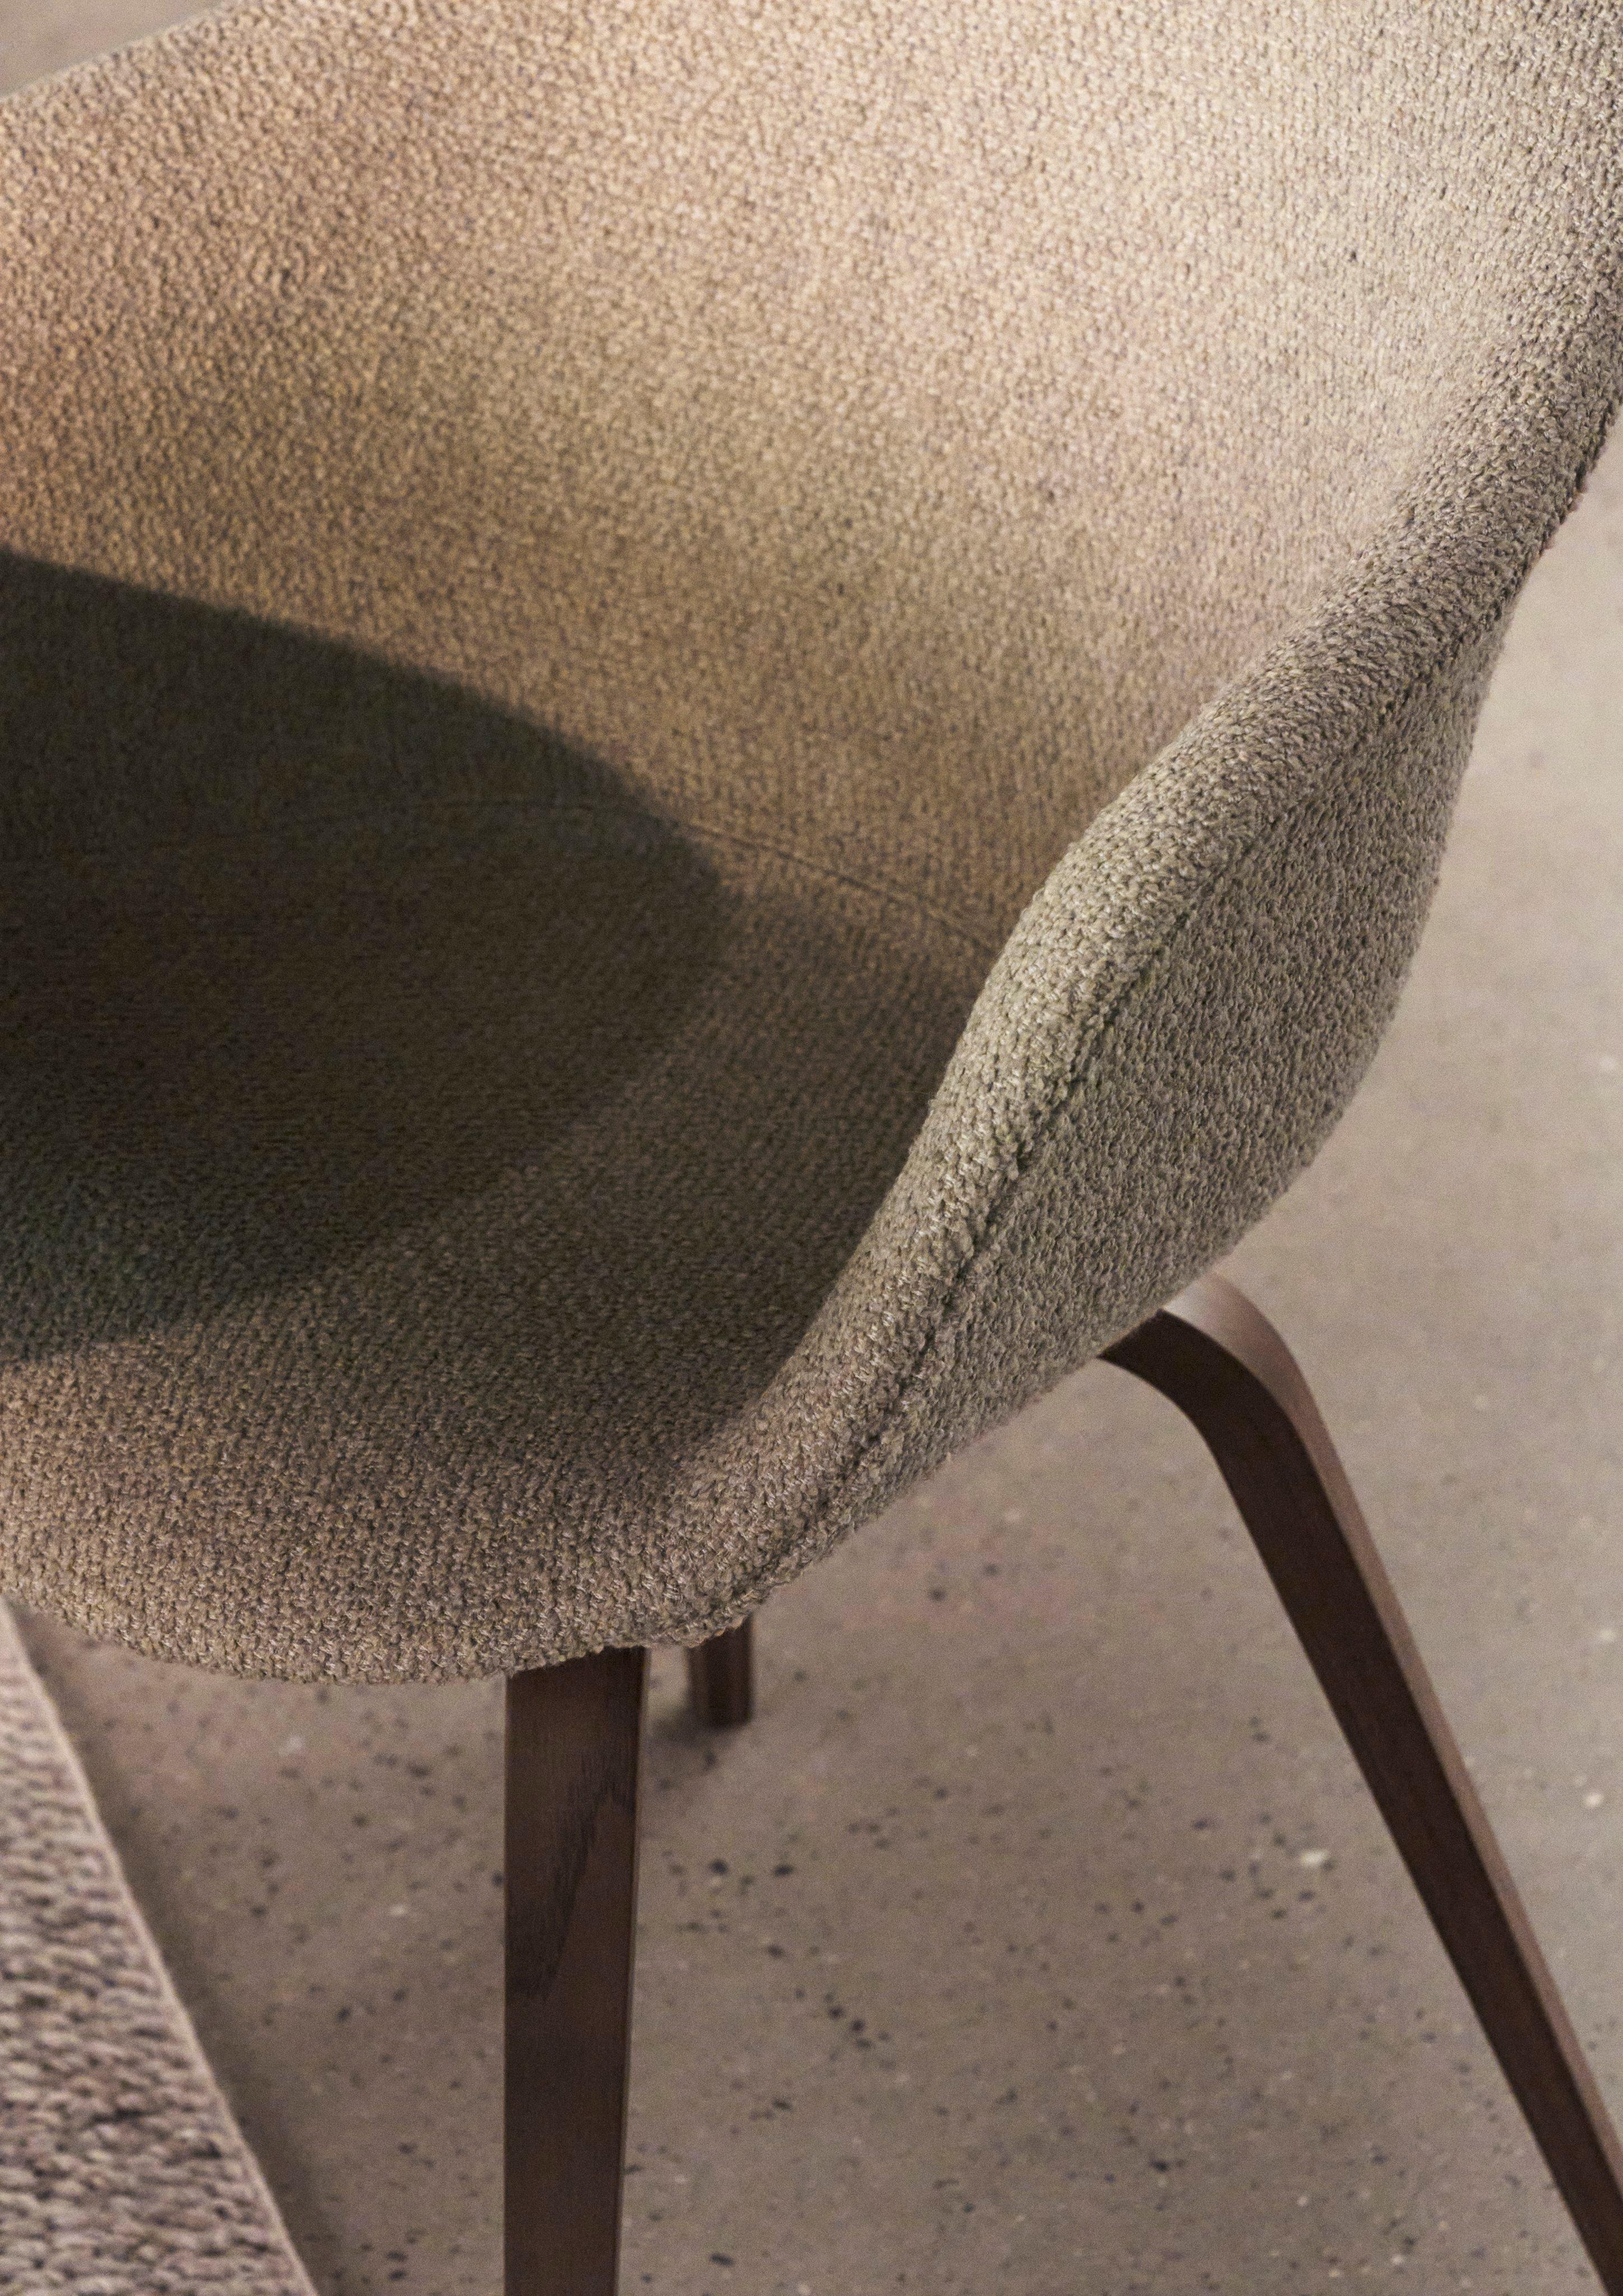 A close-up view of the cocooning Hauge dining chair upholstered in beige Lazio fabric